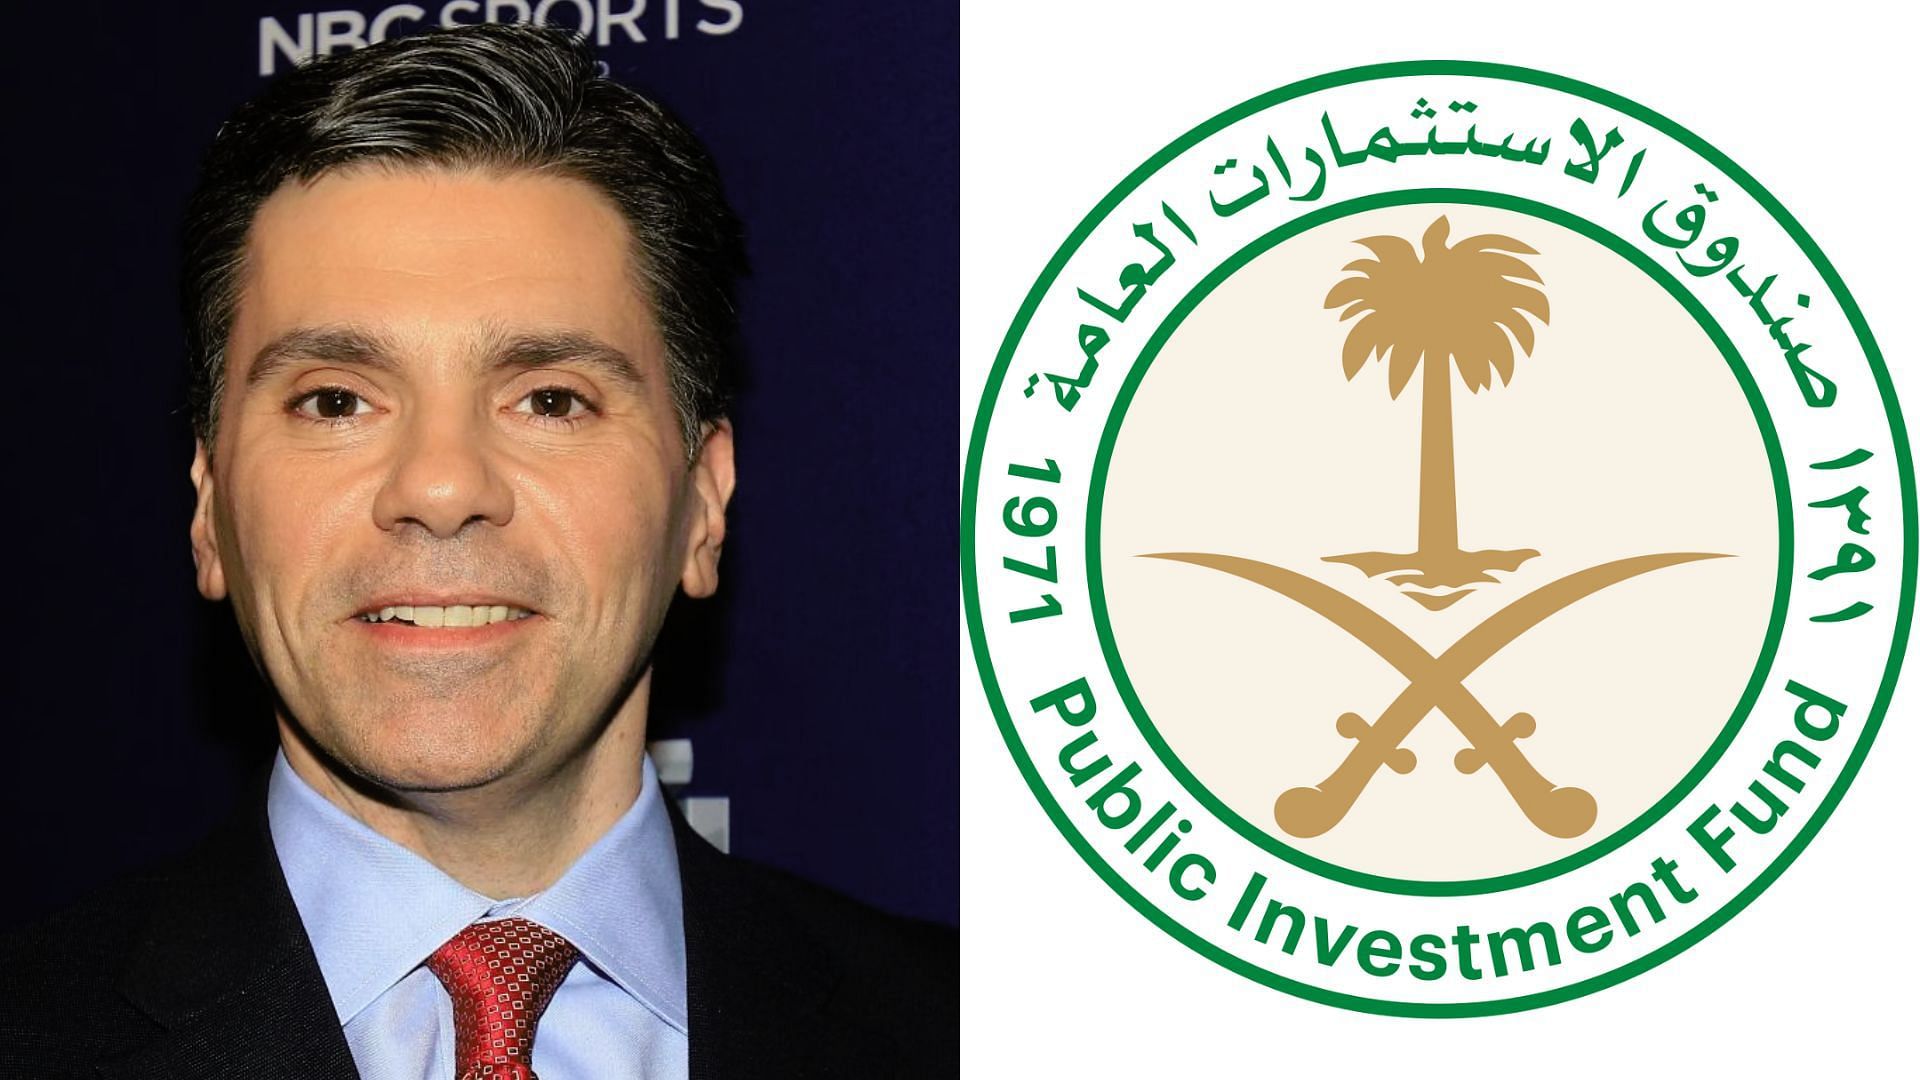 Pro Football Talk host Mike Florio believes that Saudi Arabia, through its sovereign Public Investment Fund, can eventually buy an NFL franchise or create a rival football league. (Image credit: Saudi Arabia Public Investment Fund)